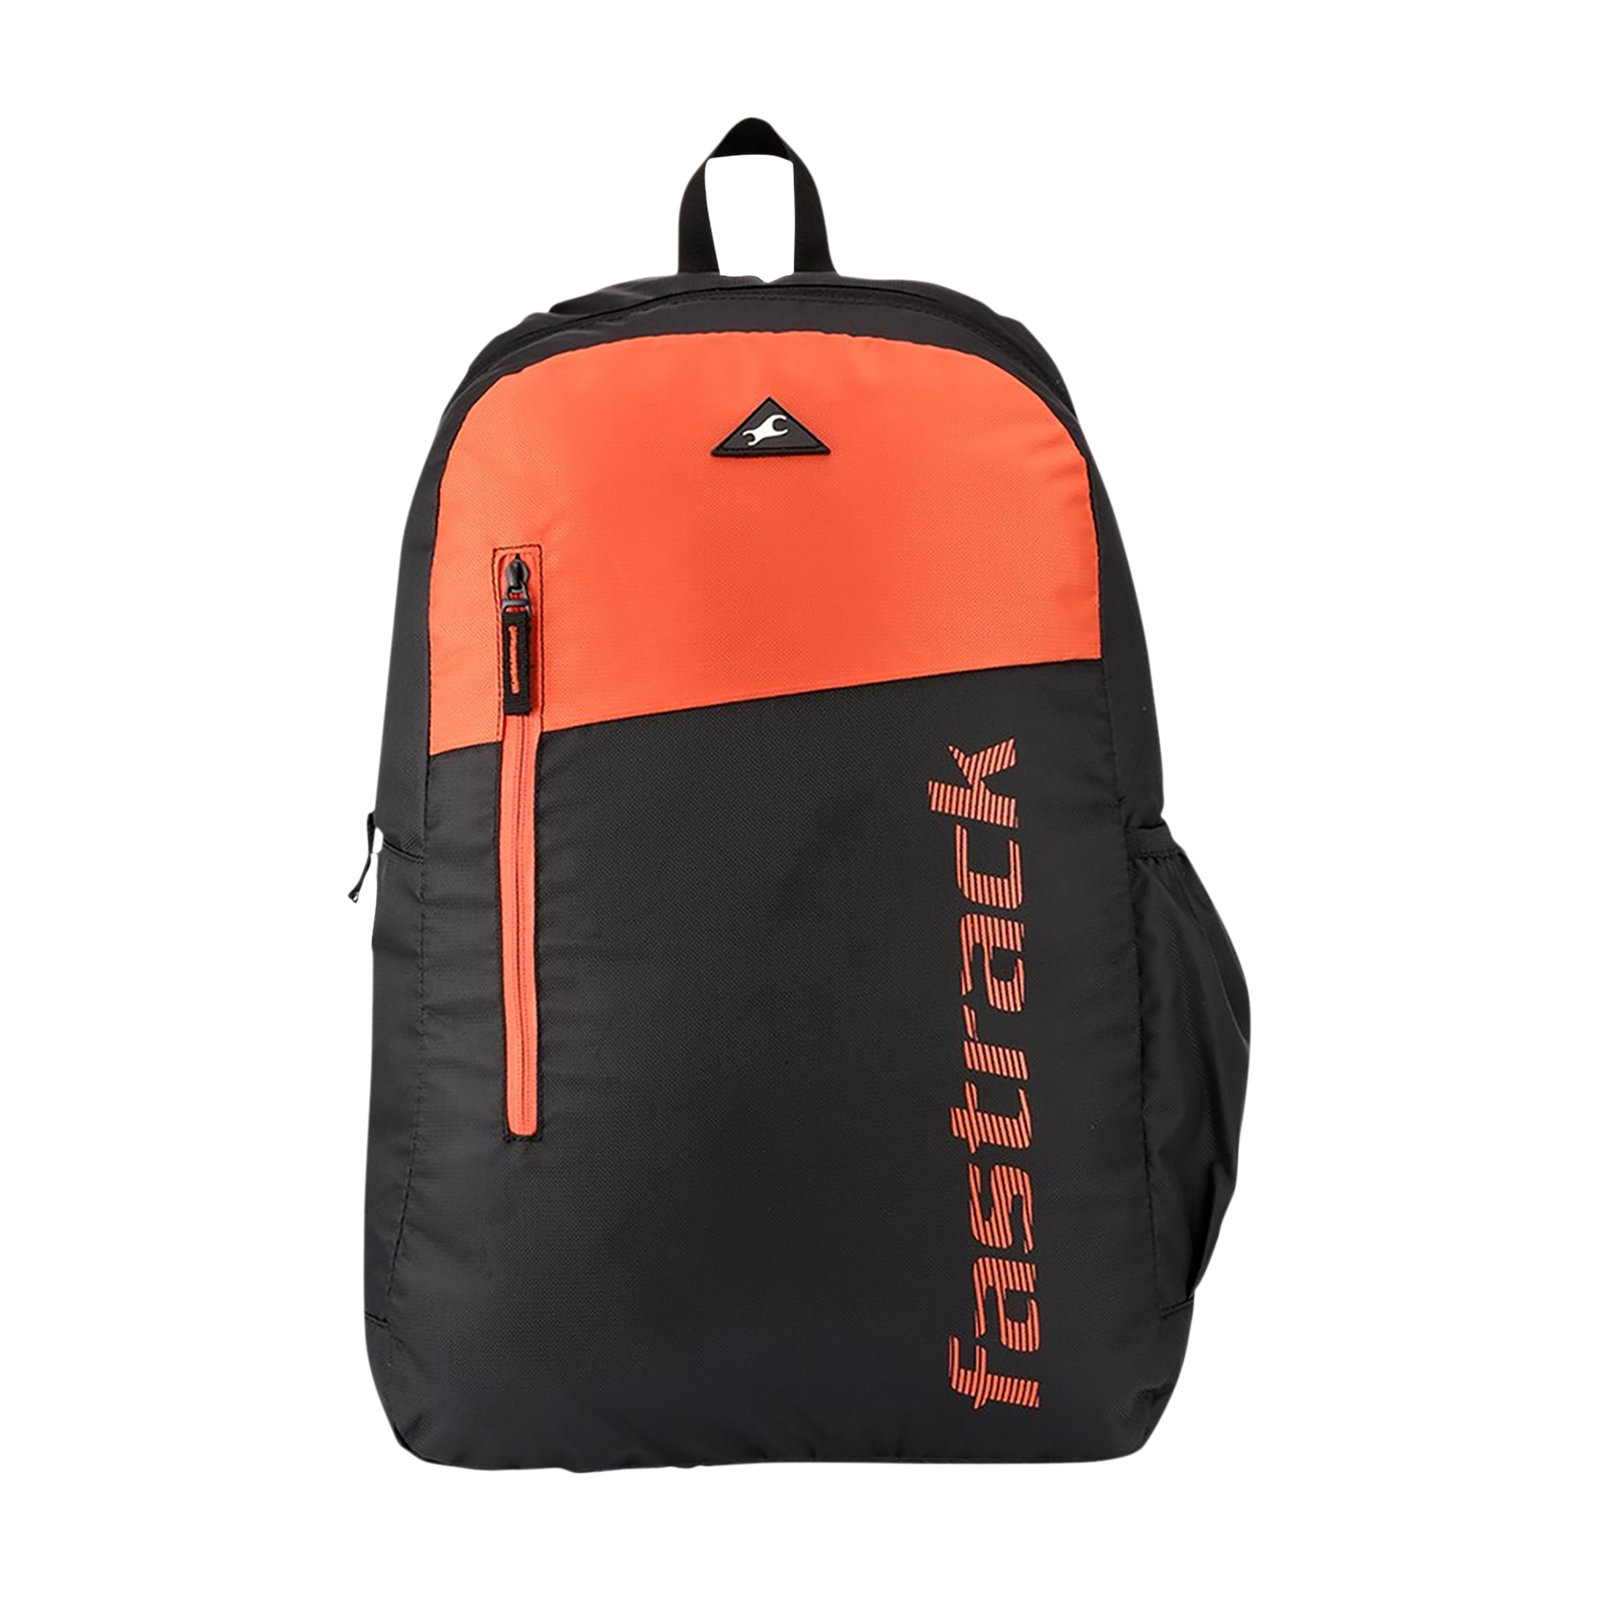 Discover more than 188 fastrack bags latest